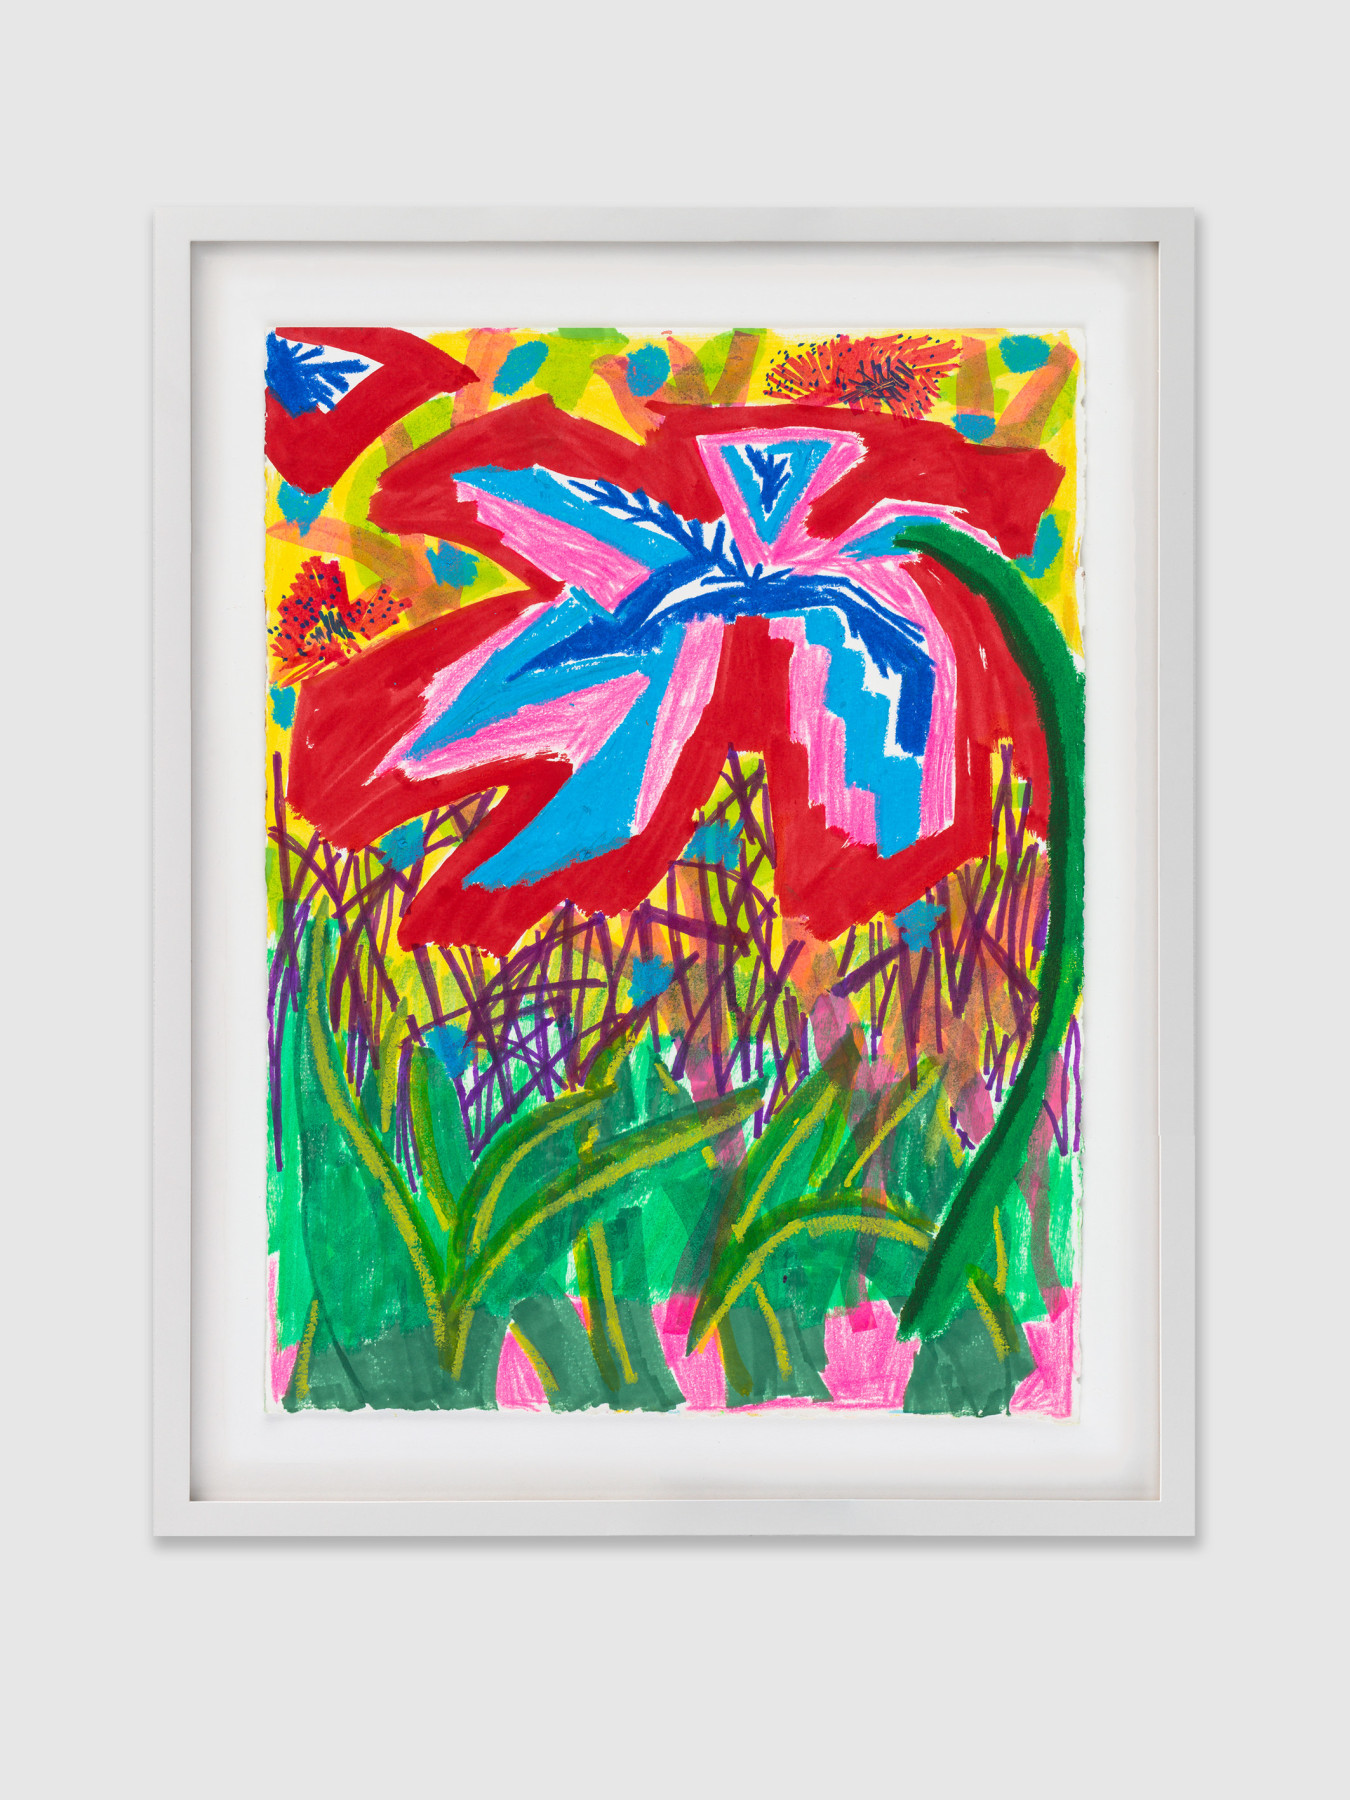 BRIGHT AND POSITIVE,&amp;nbsp;2020
Mixed media on paper, Image 38 x 28 cm / 15 x 11 in,
Frame 48 x 38 x 3.5 cm / 18 7/8 x 15 x 1 3/8 in